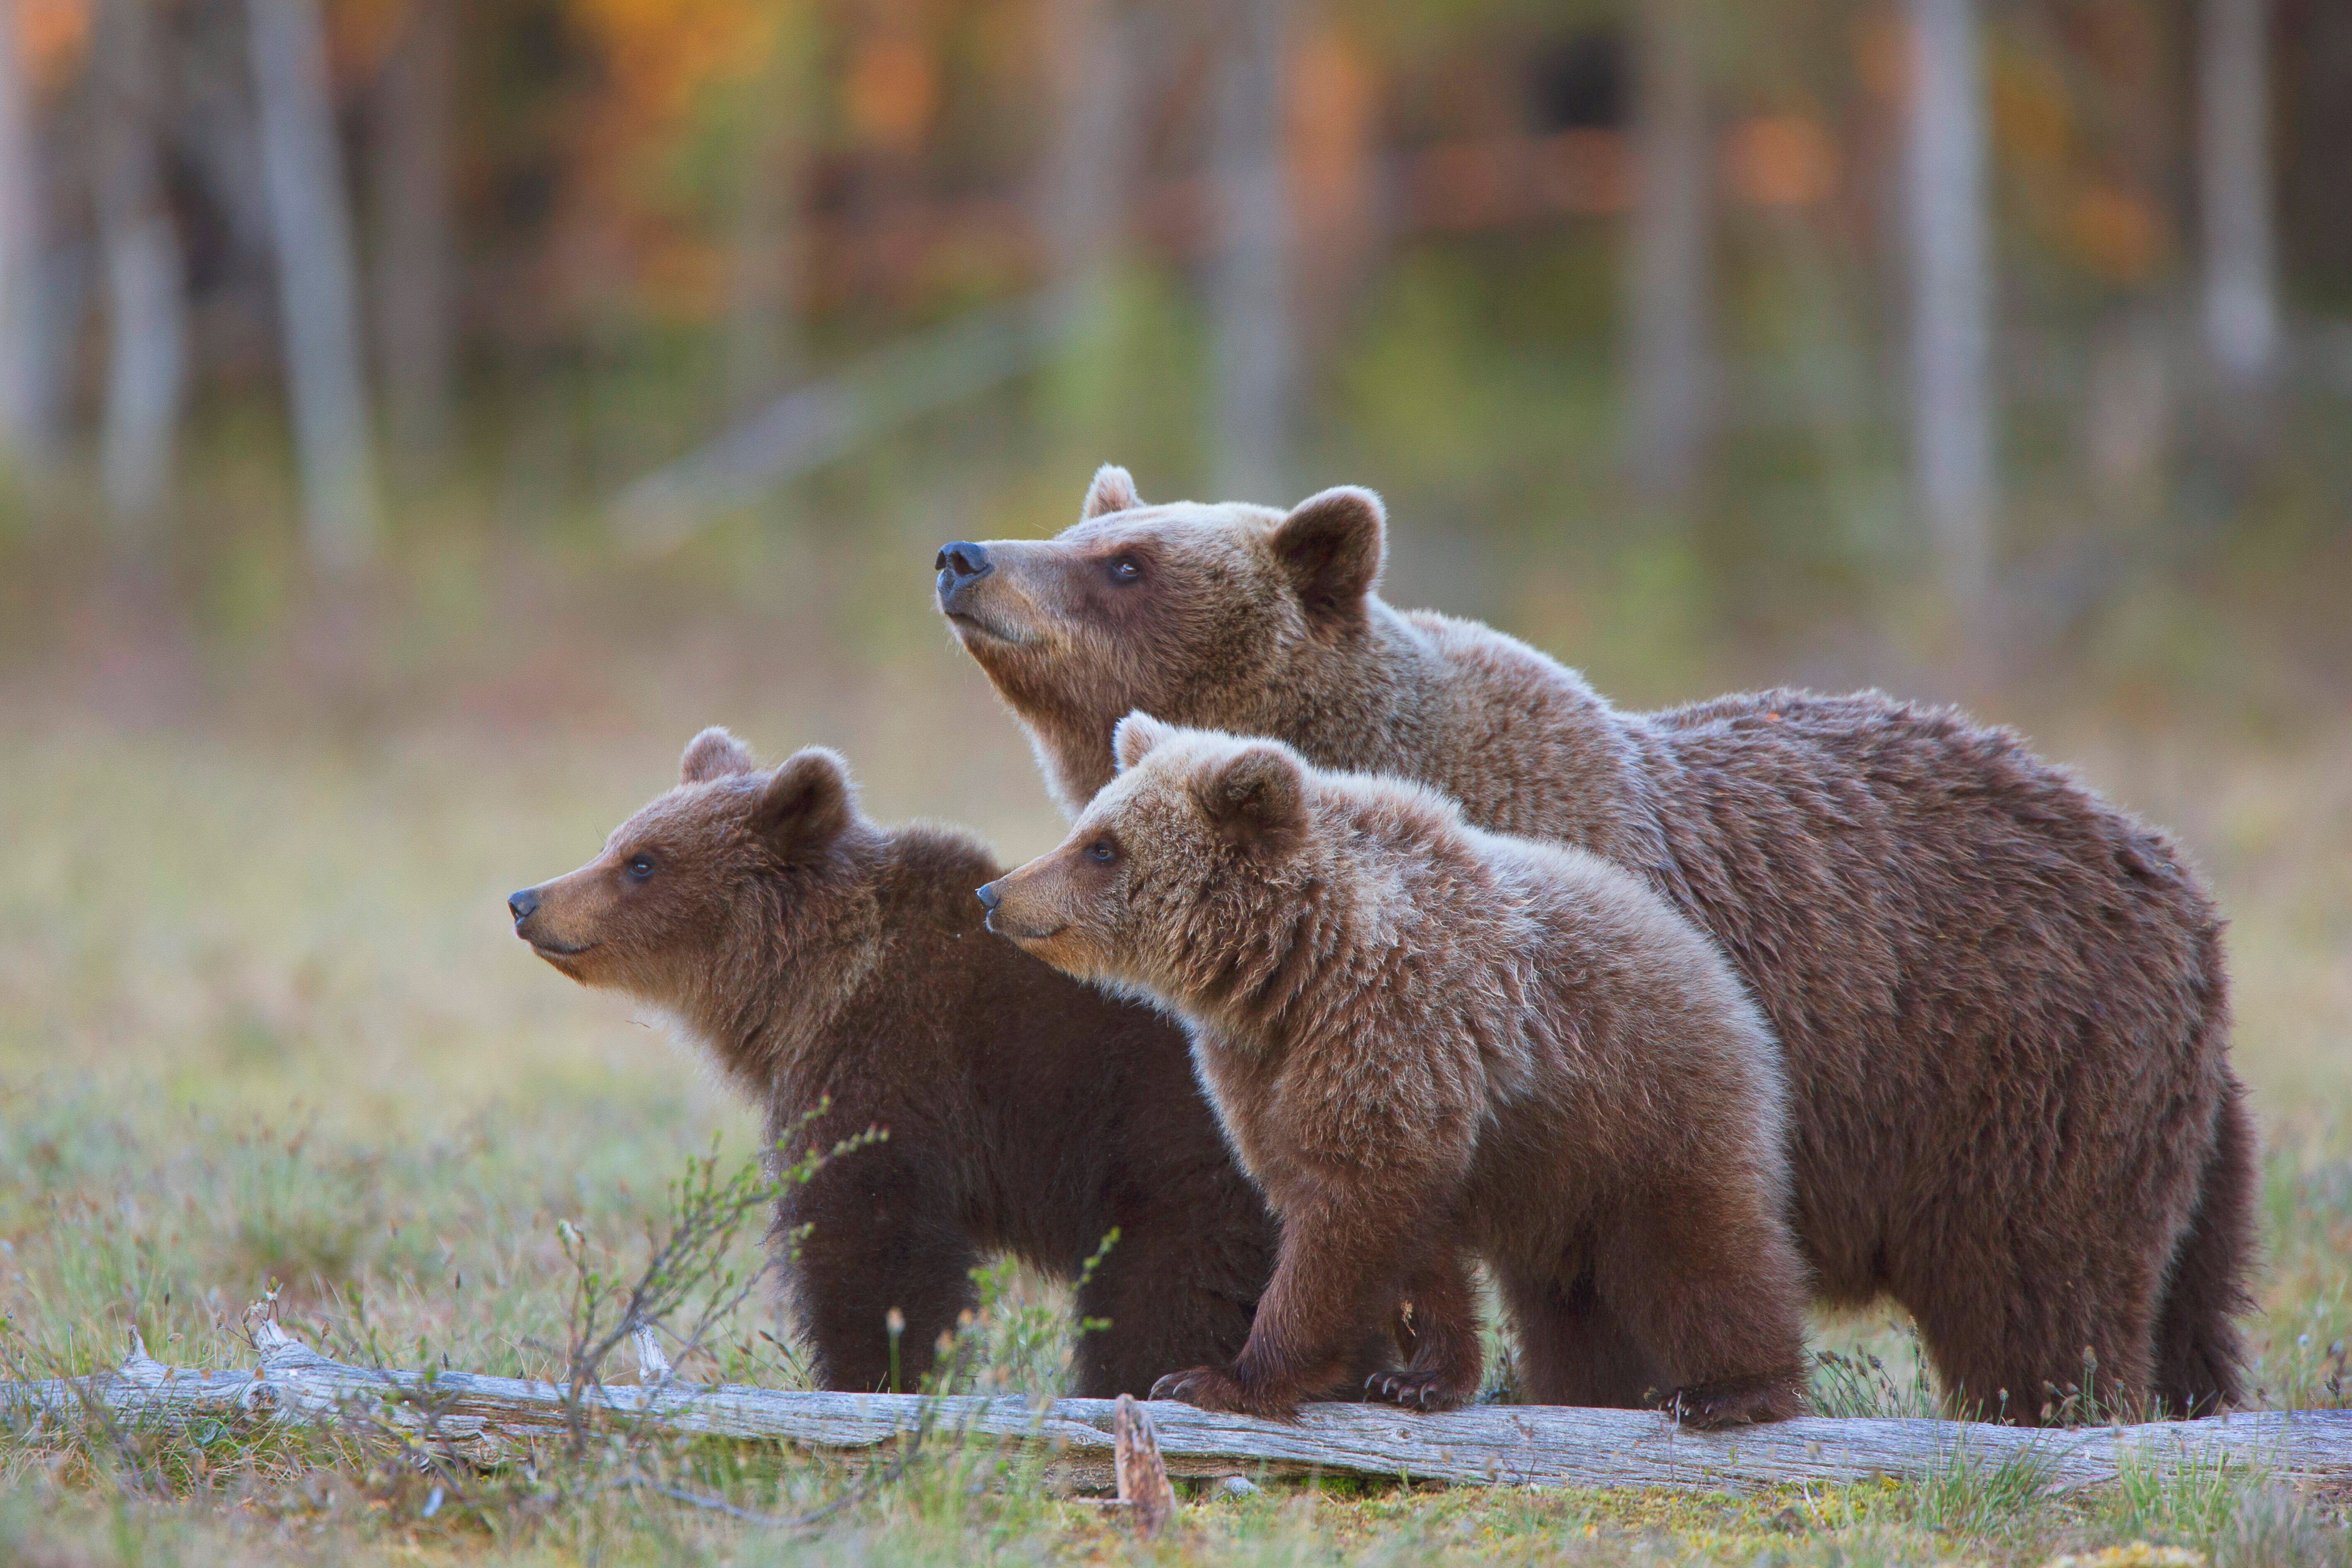 Report: Finland's bear population is declining